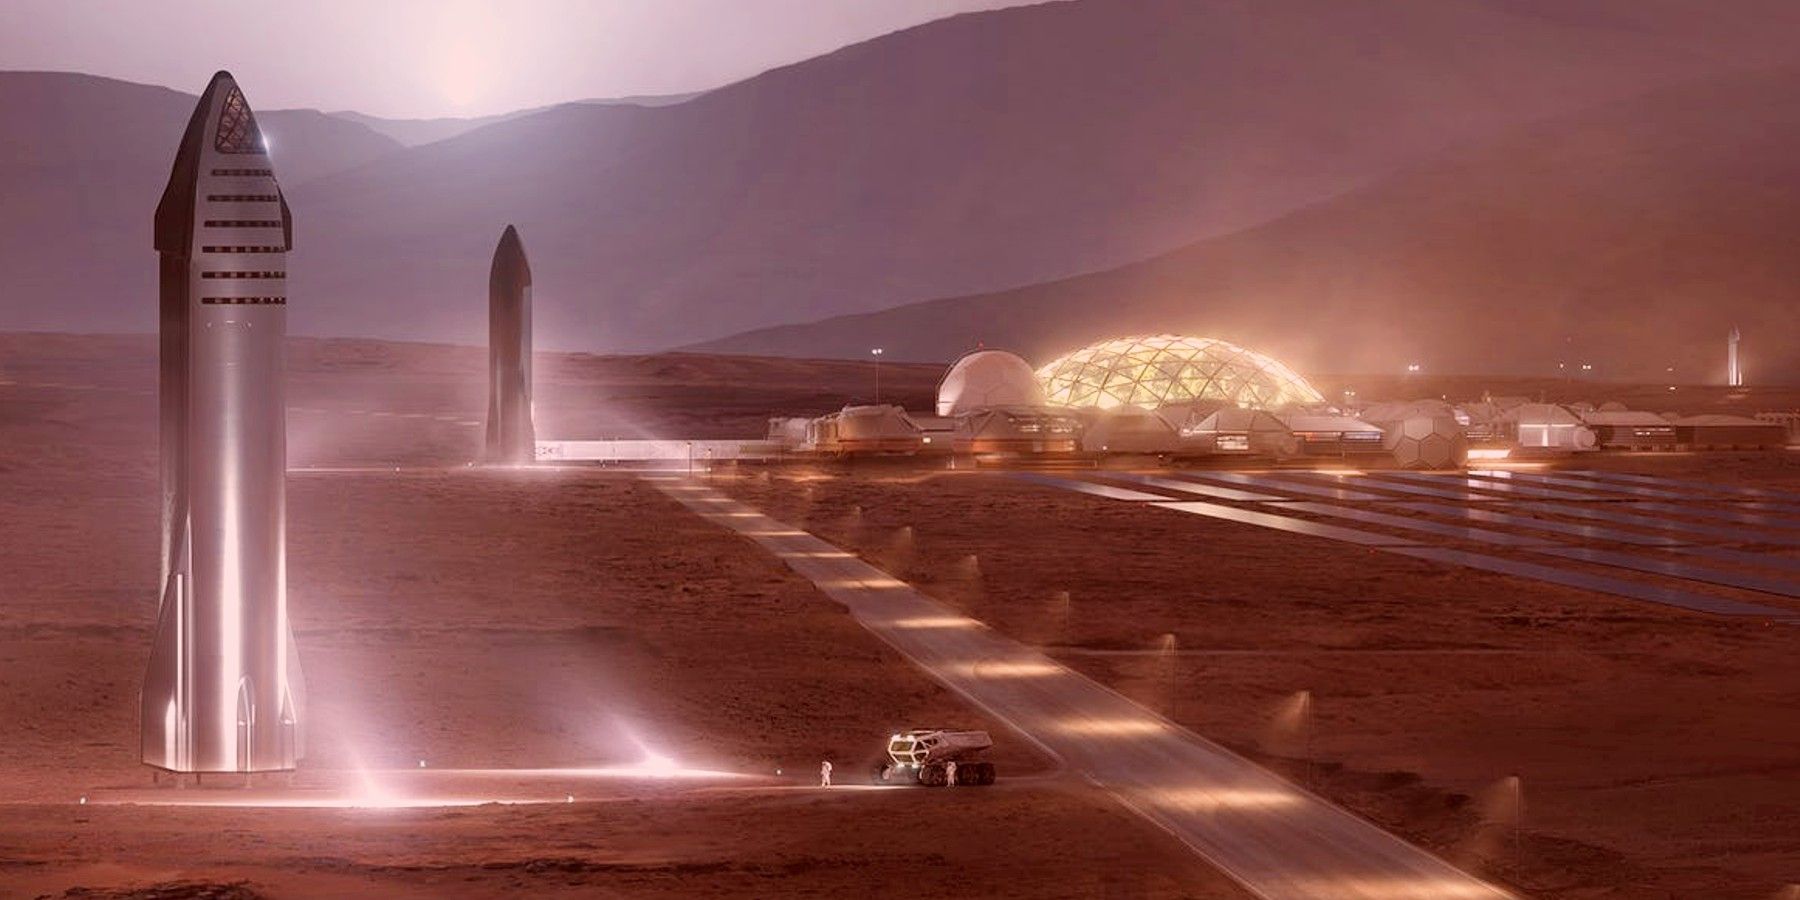 SpaceX Mars City: What We Know About SpaceX’s Plans